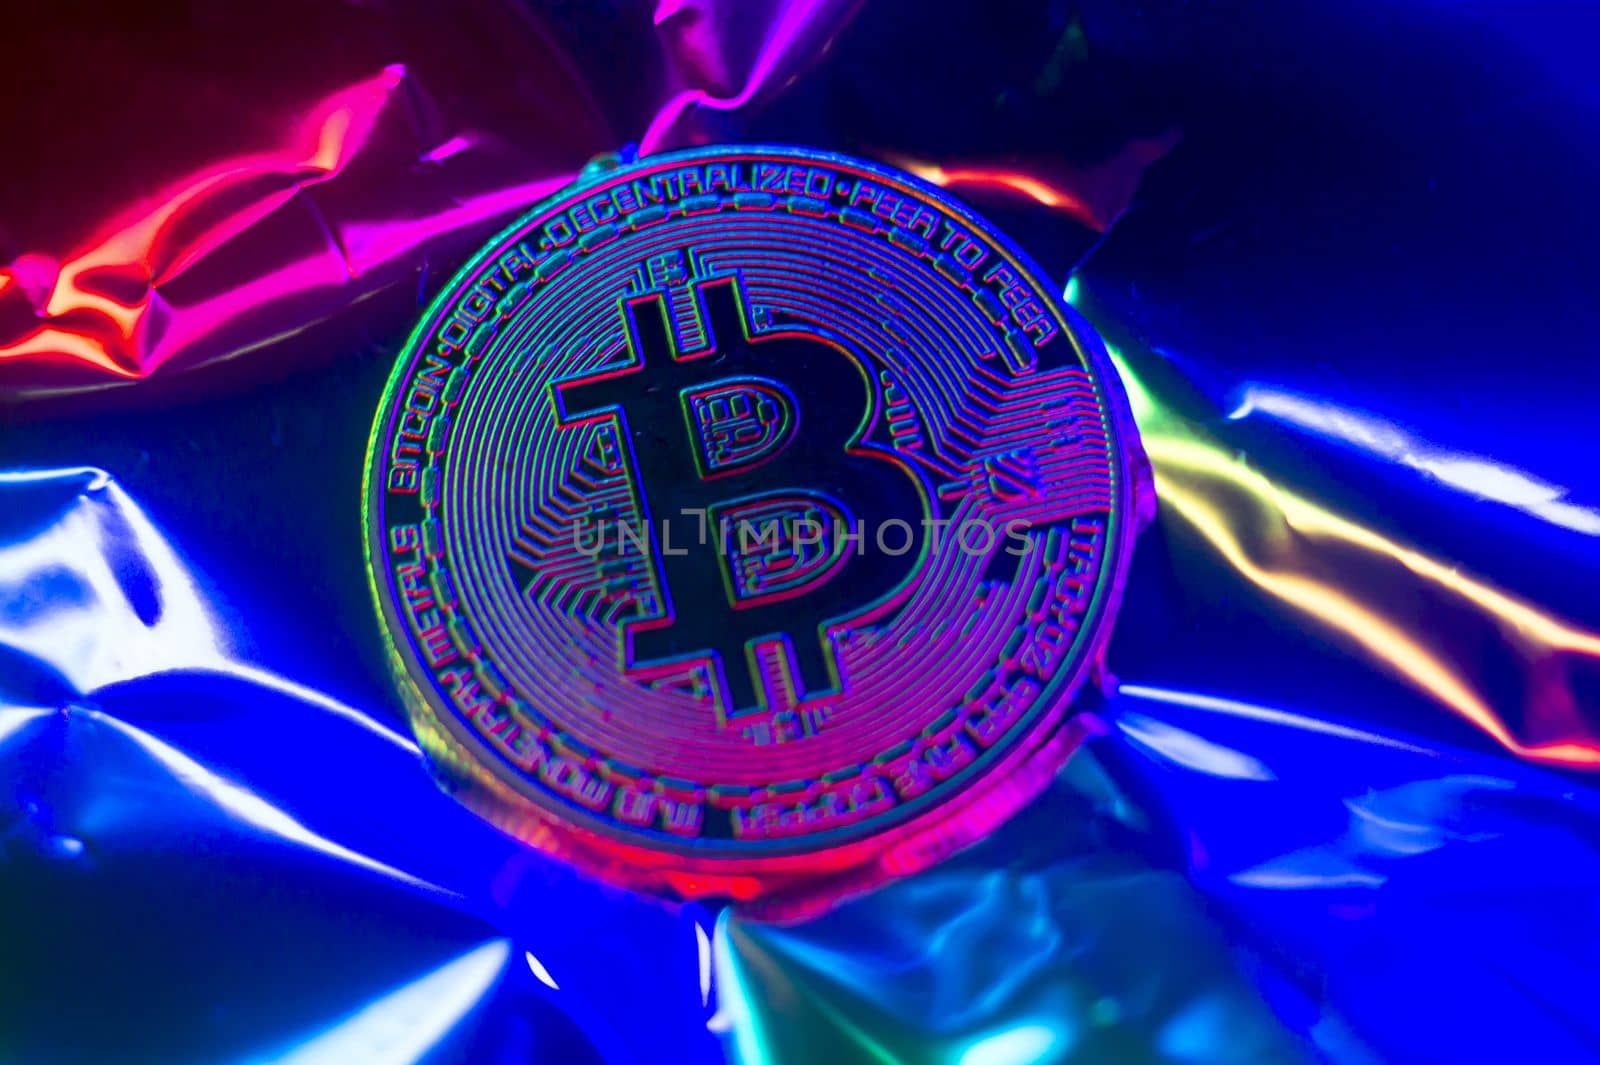 Crypto currency green-golden coin with bitcoin symbol on isolated on metallic background. Bitcoin Coin on black background. Bitcoin cryptocurrency. Cryptocurrency Coin Concept. single golden valuable